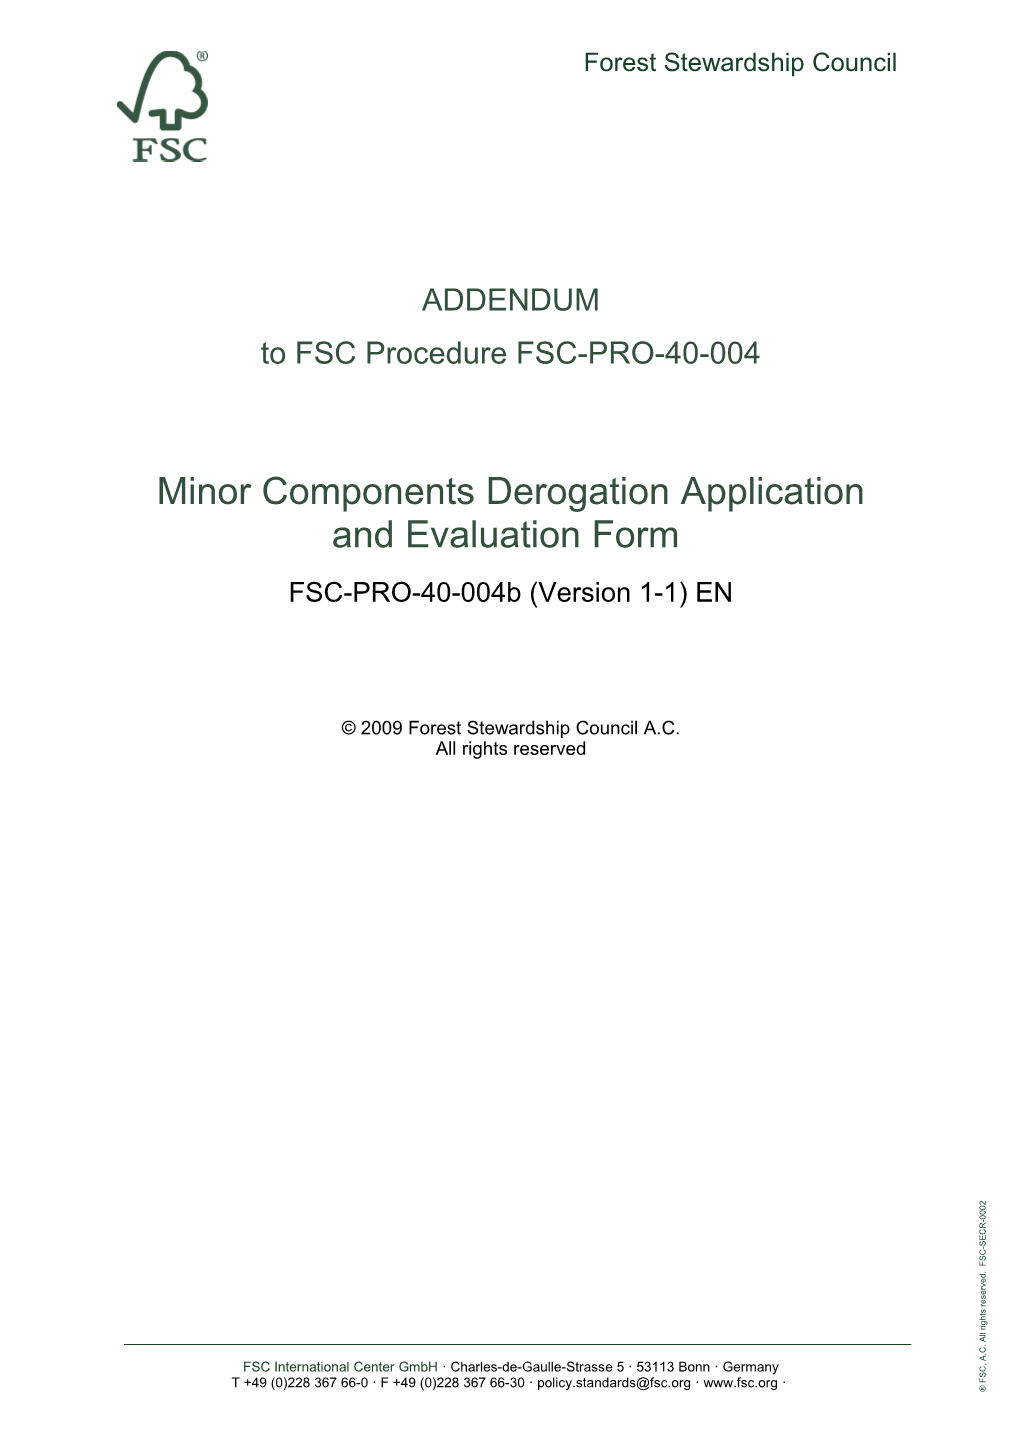 Form for Minor Components Derogation Applications and Evaluations AD